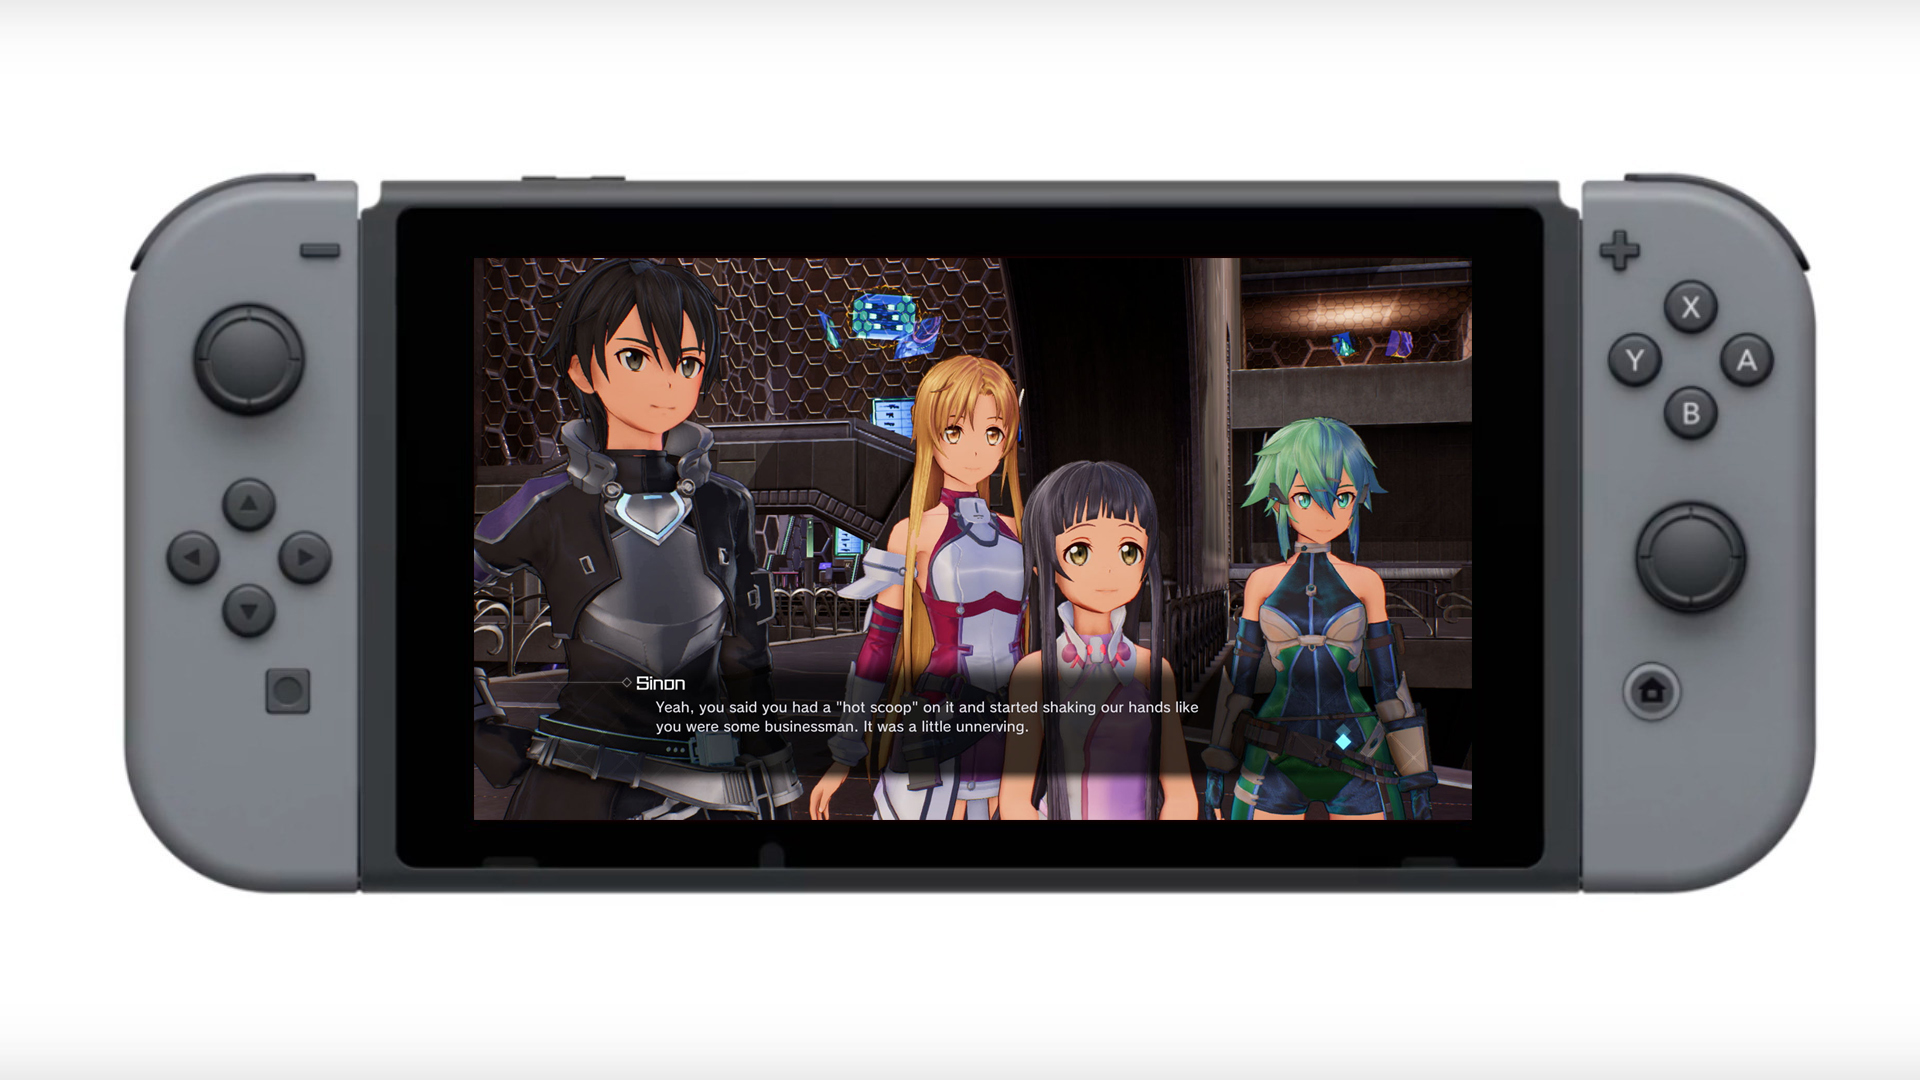 Bandai Namco is Contemplating Sword Art Online Games for Switch